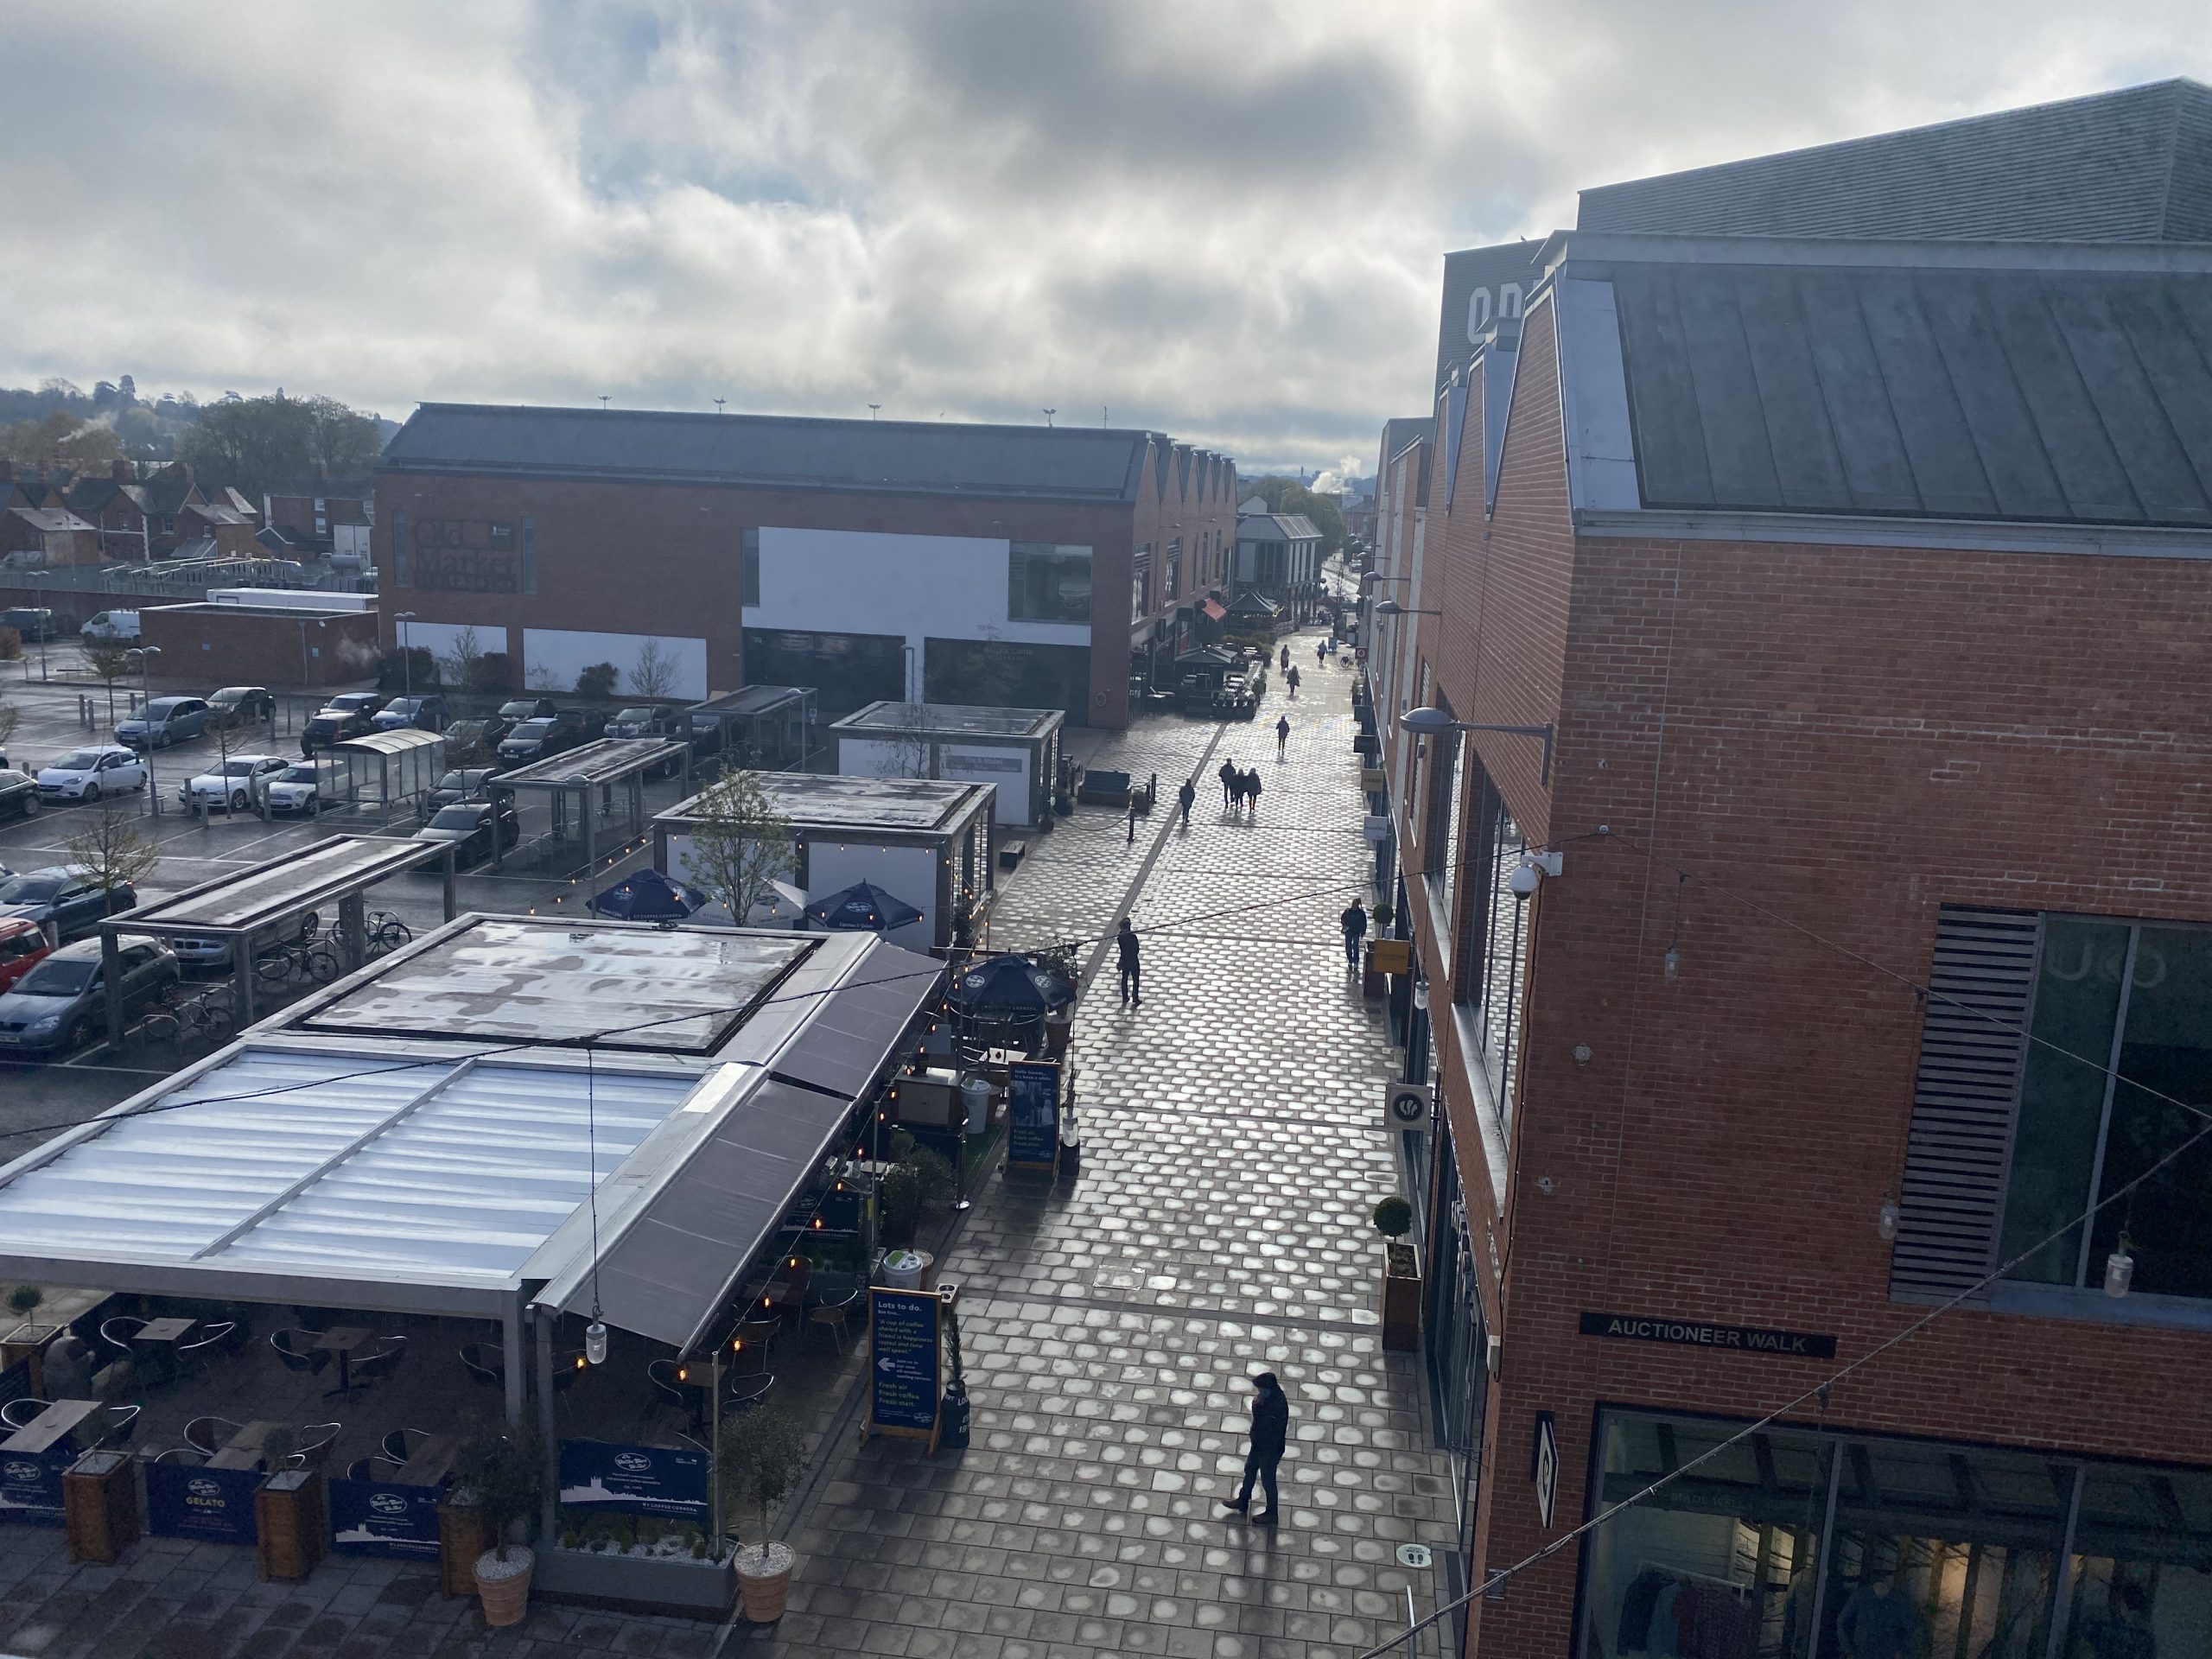 NEWS | Stores reopen at Old Market Hereford as Debenhams opens to clear remaining stock